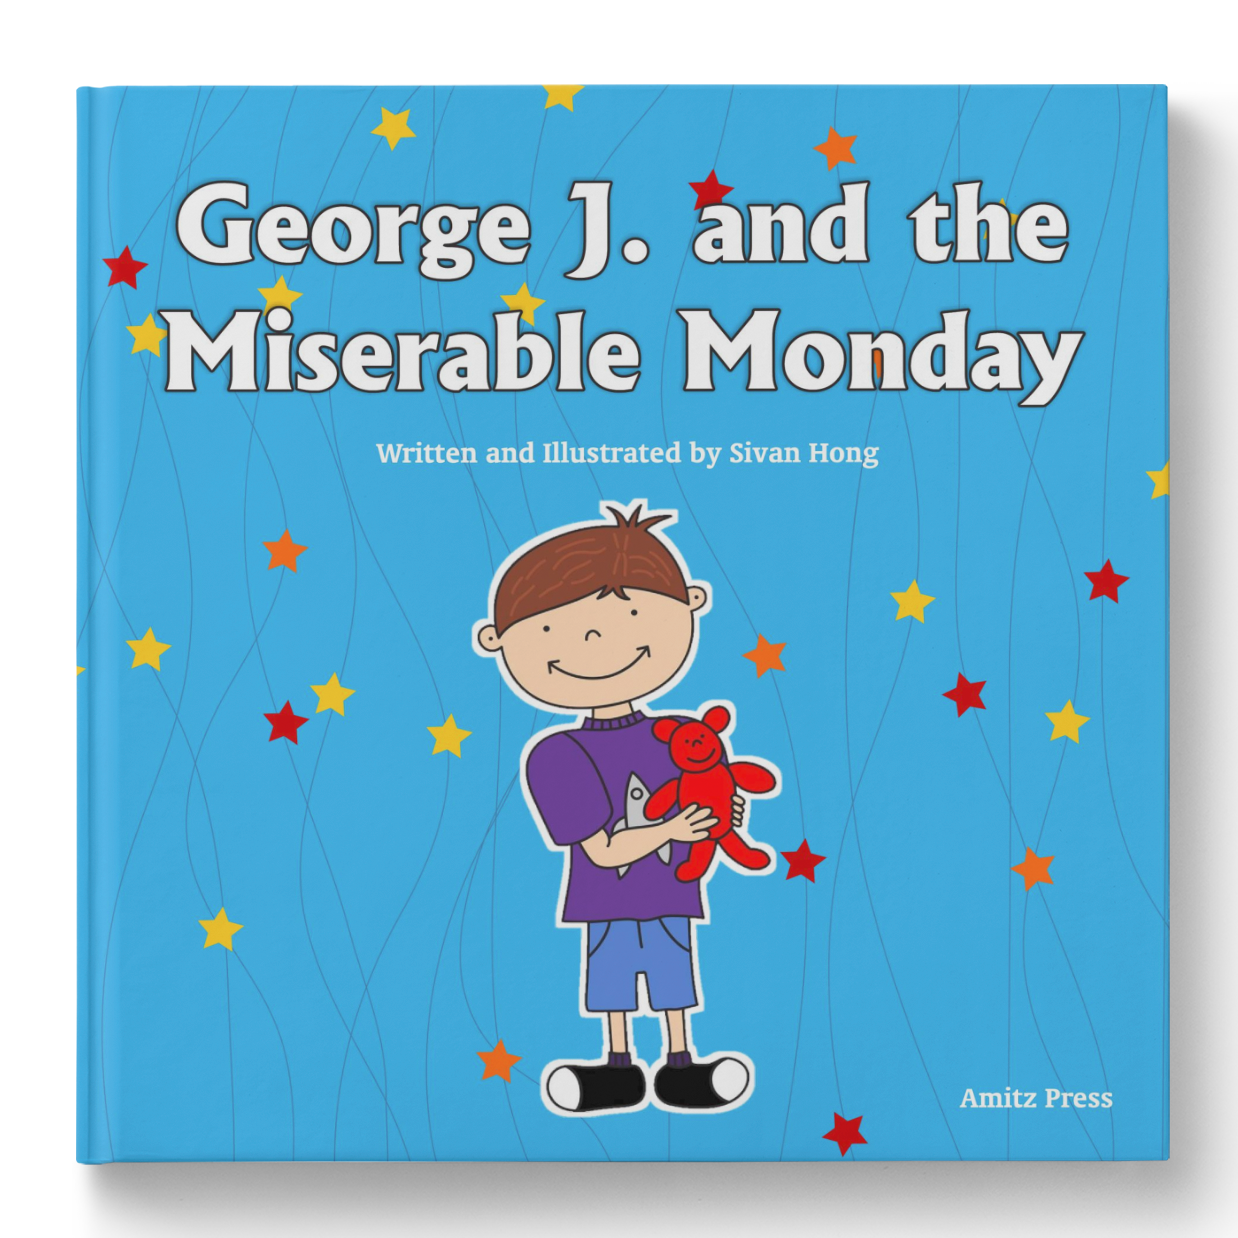 George J. and the Miserable Monday